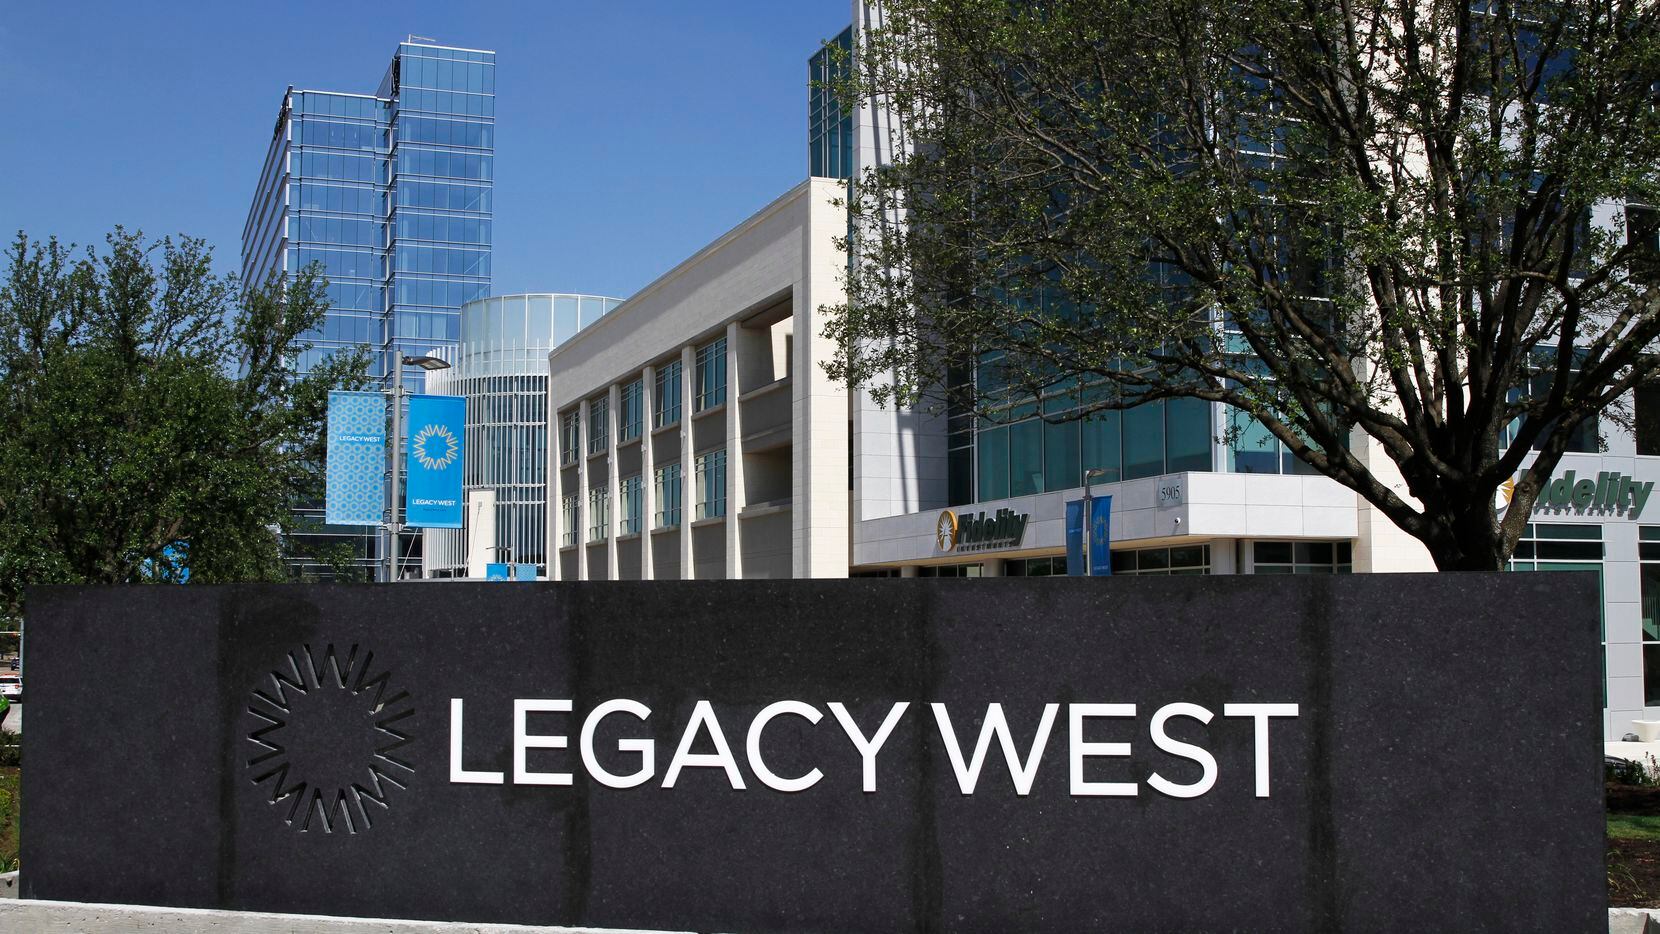 With the success of Plano's Legacy West project, other developers are latching onto the...